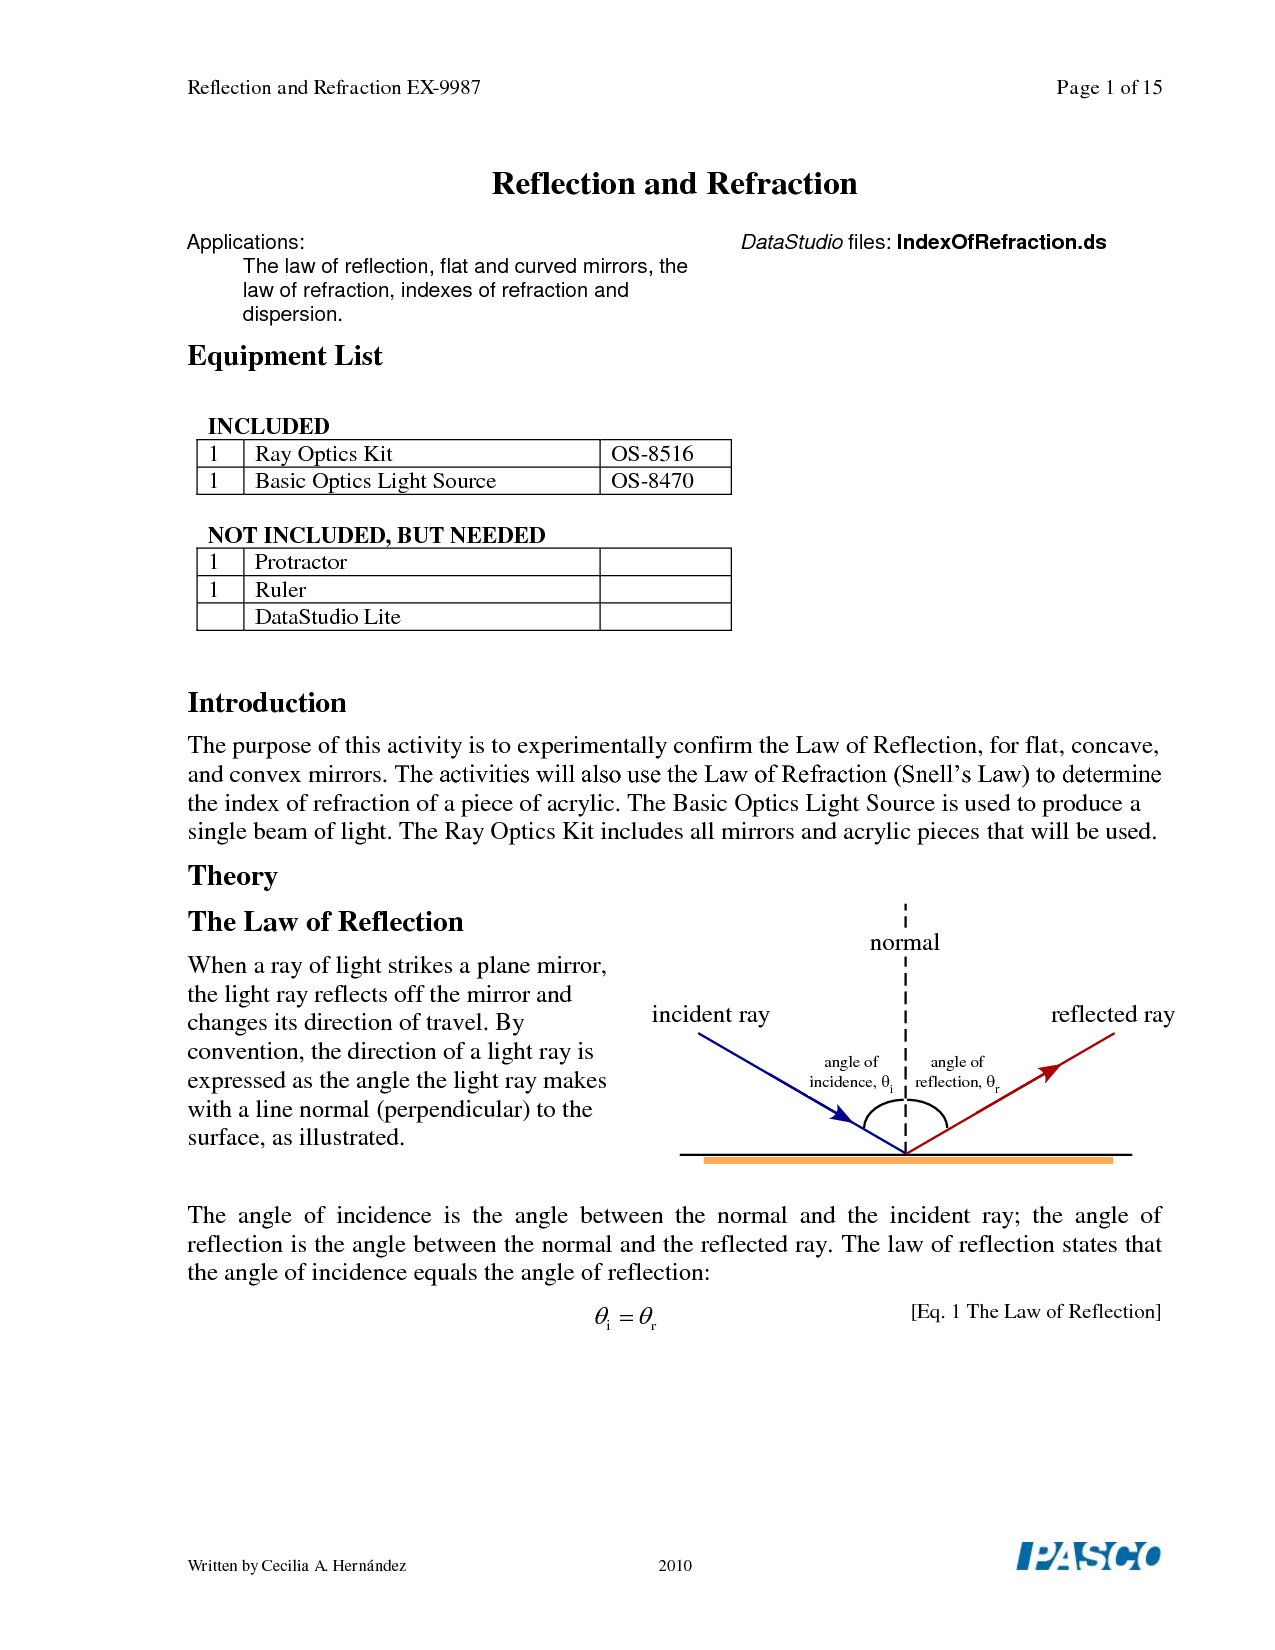 Reflection and Refraction Worksheets Image